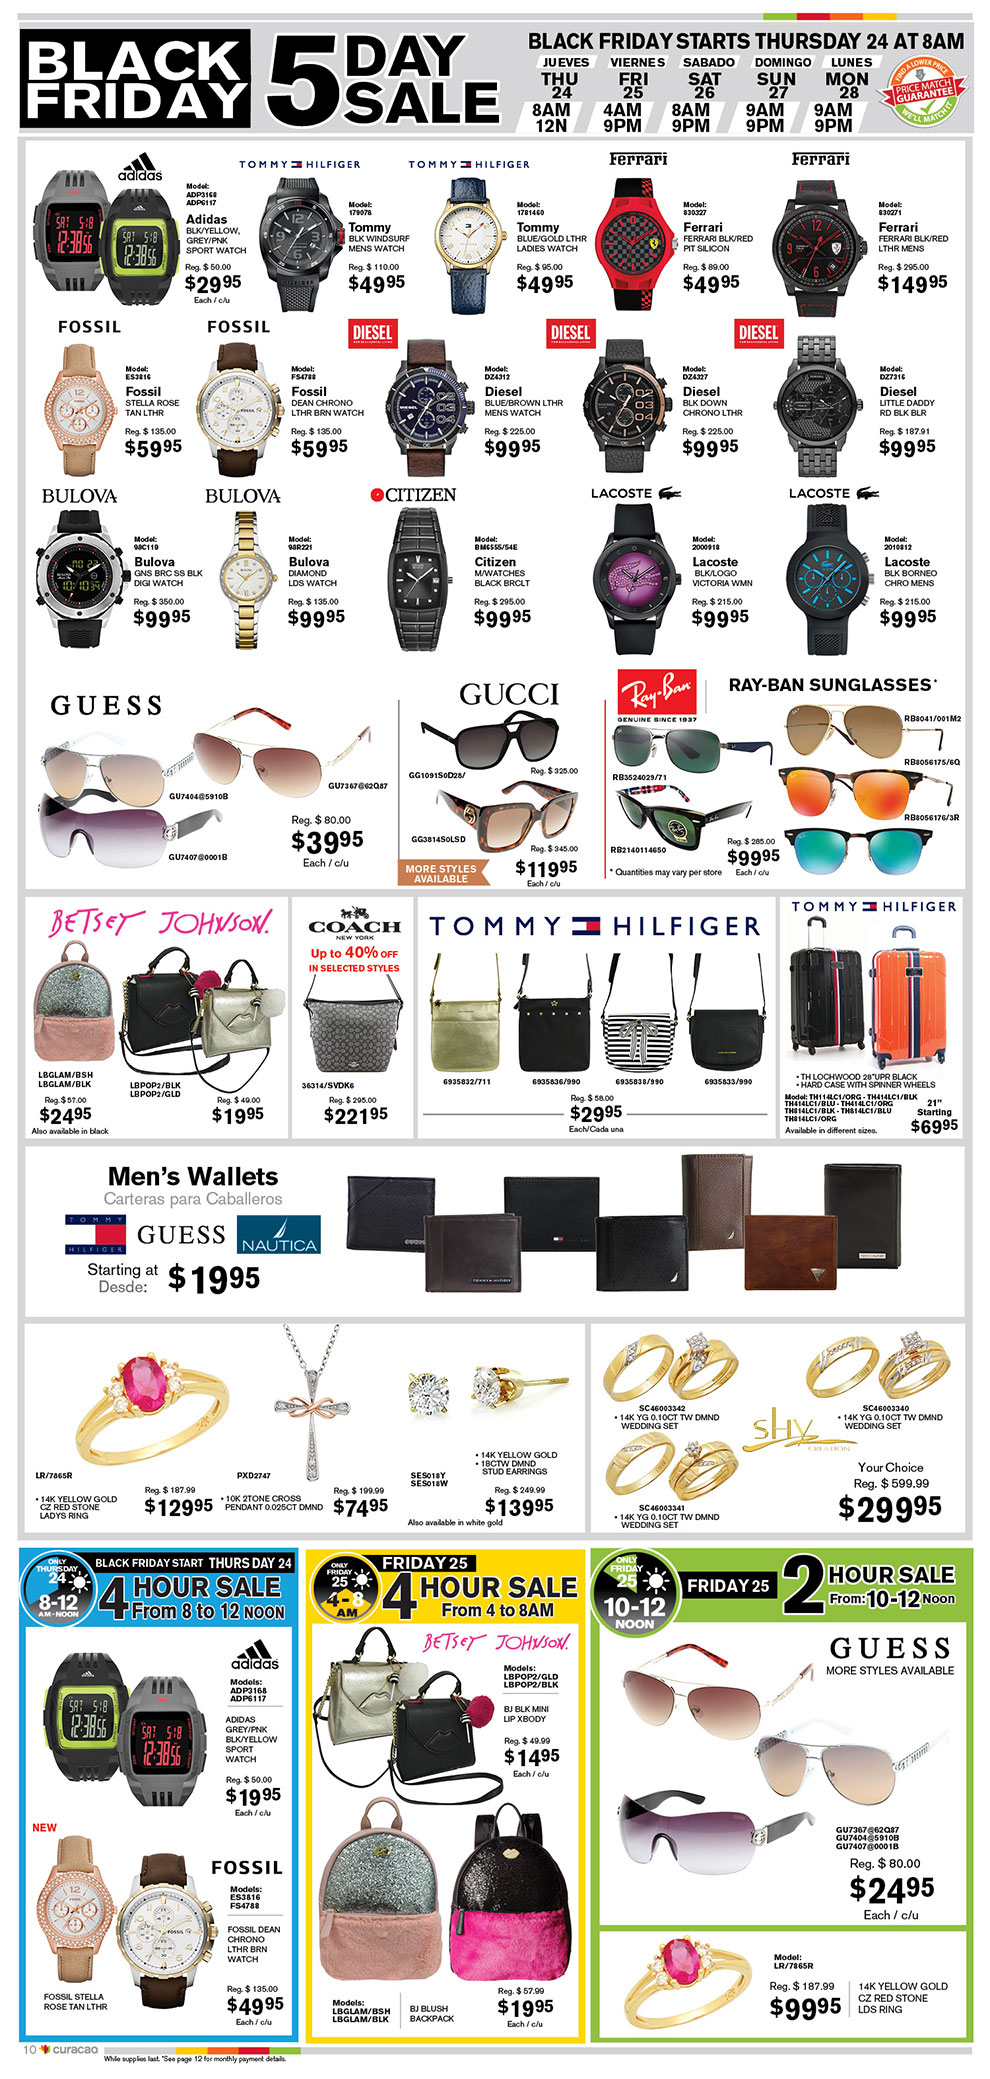 Curacao 2016 Black Friday Ad Page 10